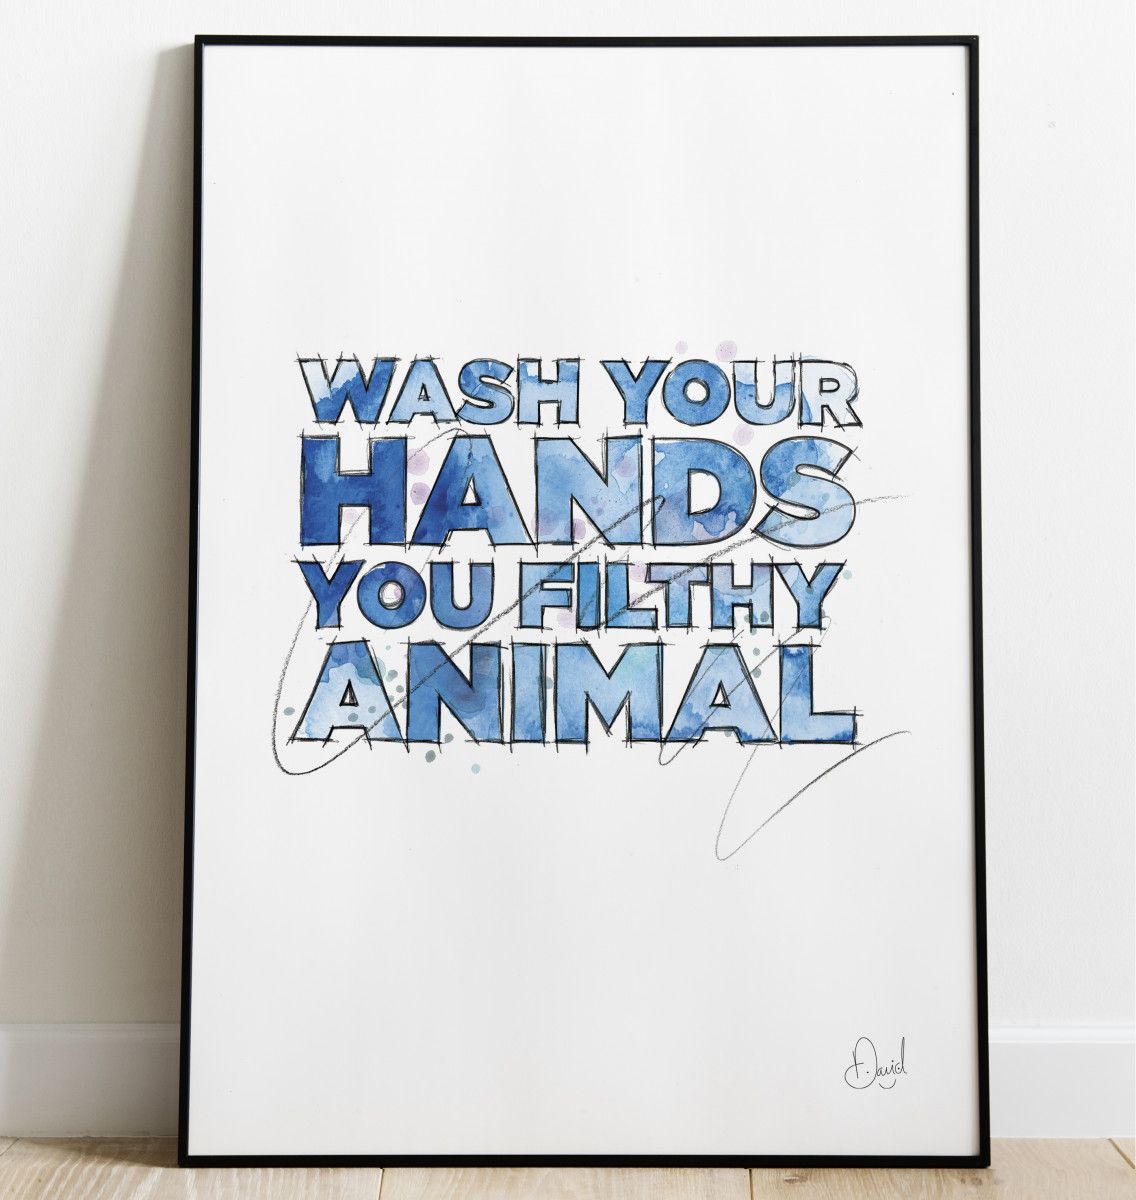 Wash your hands you filth animal - Typographic art print